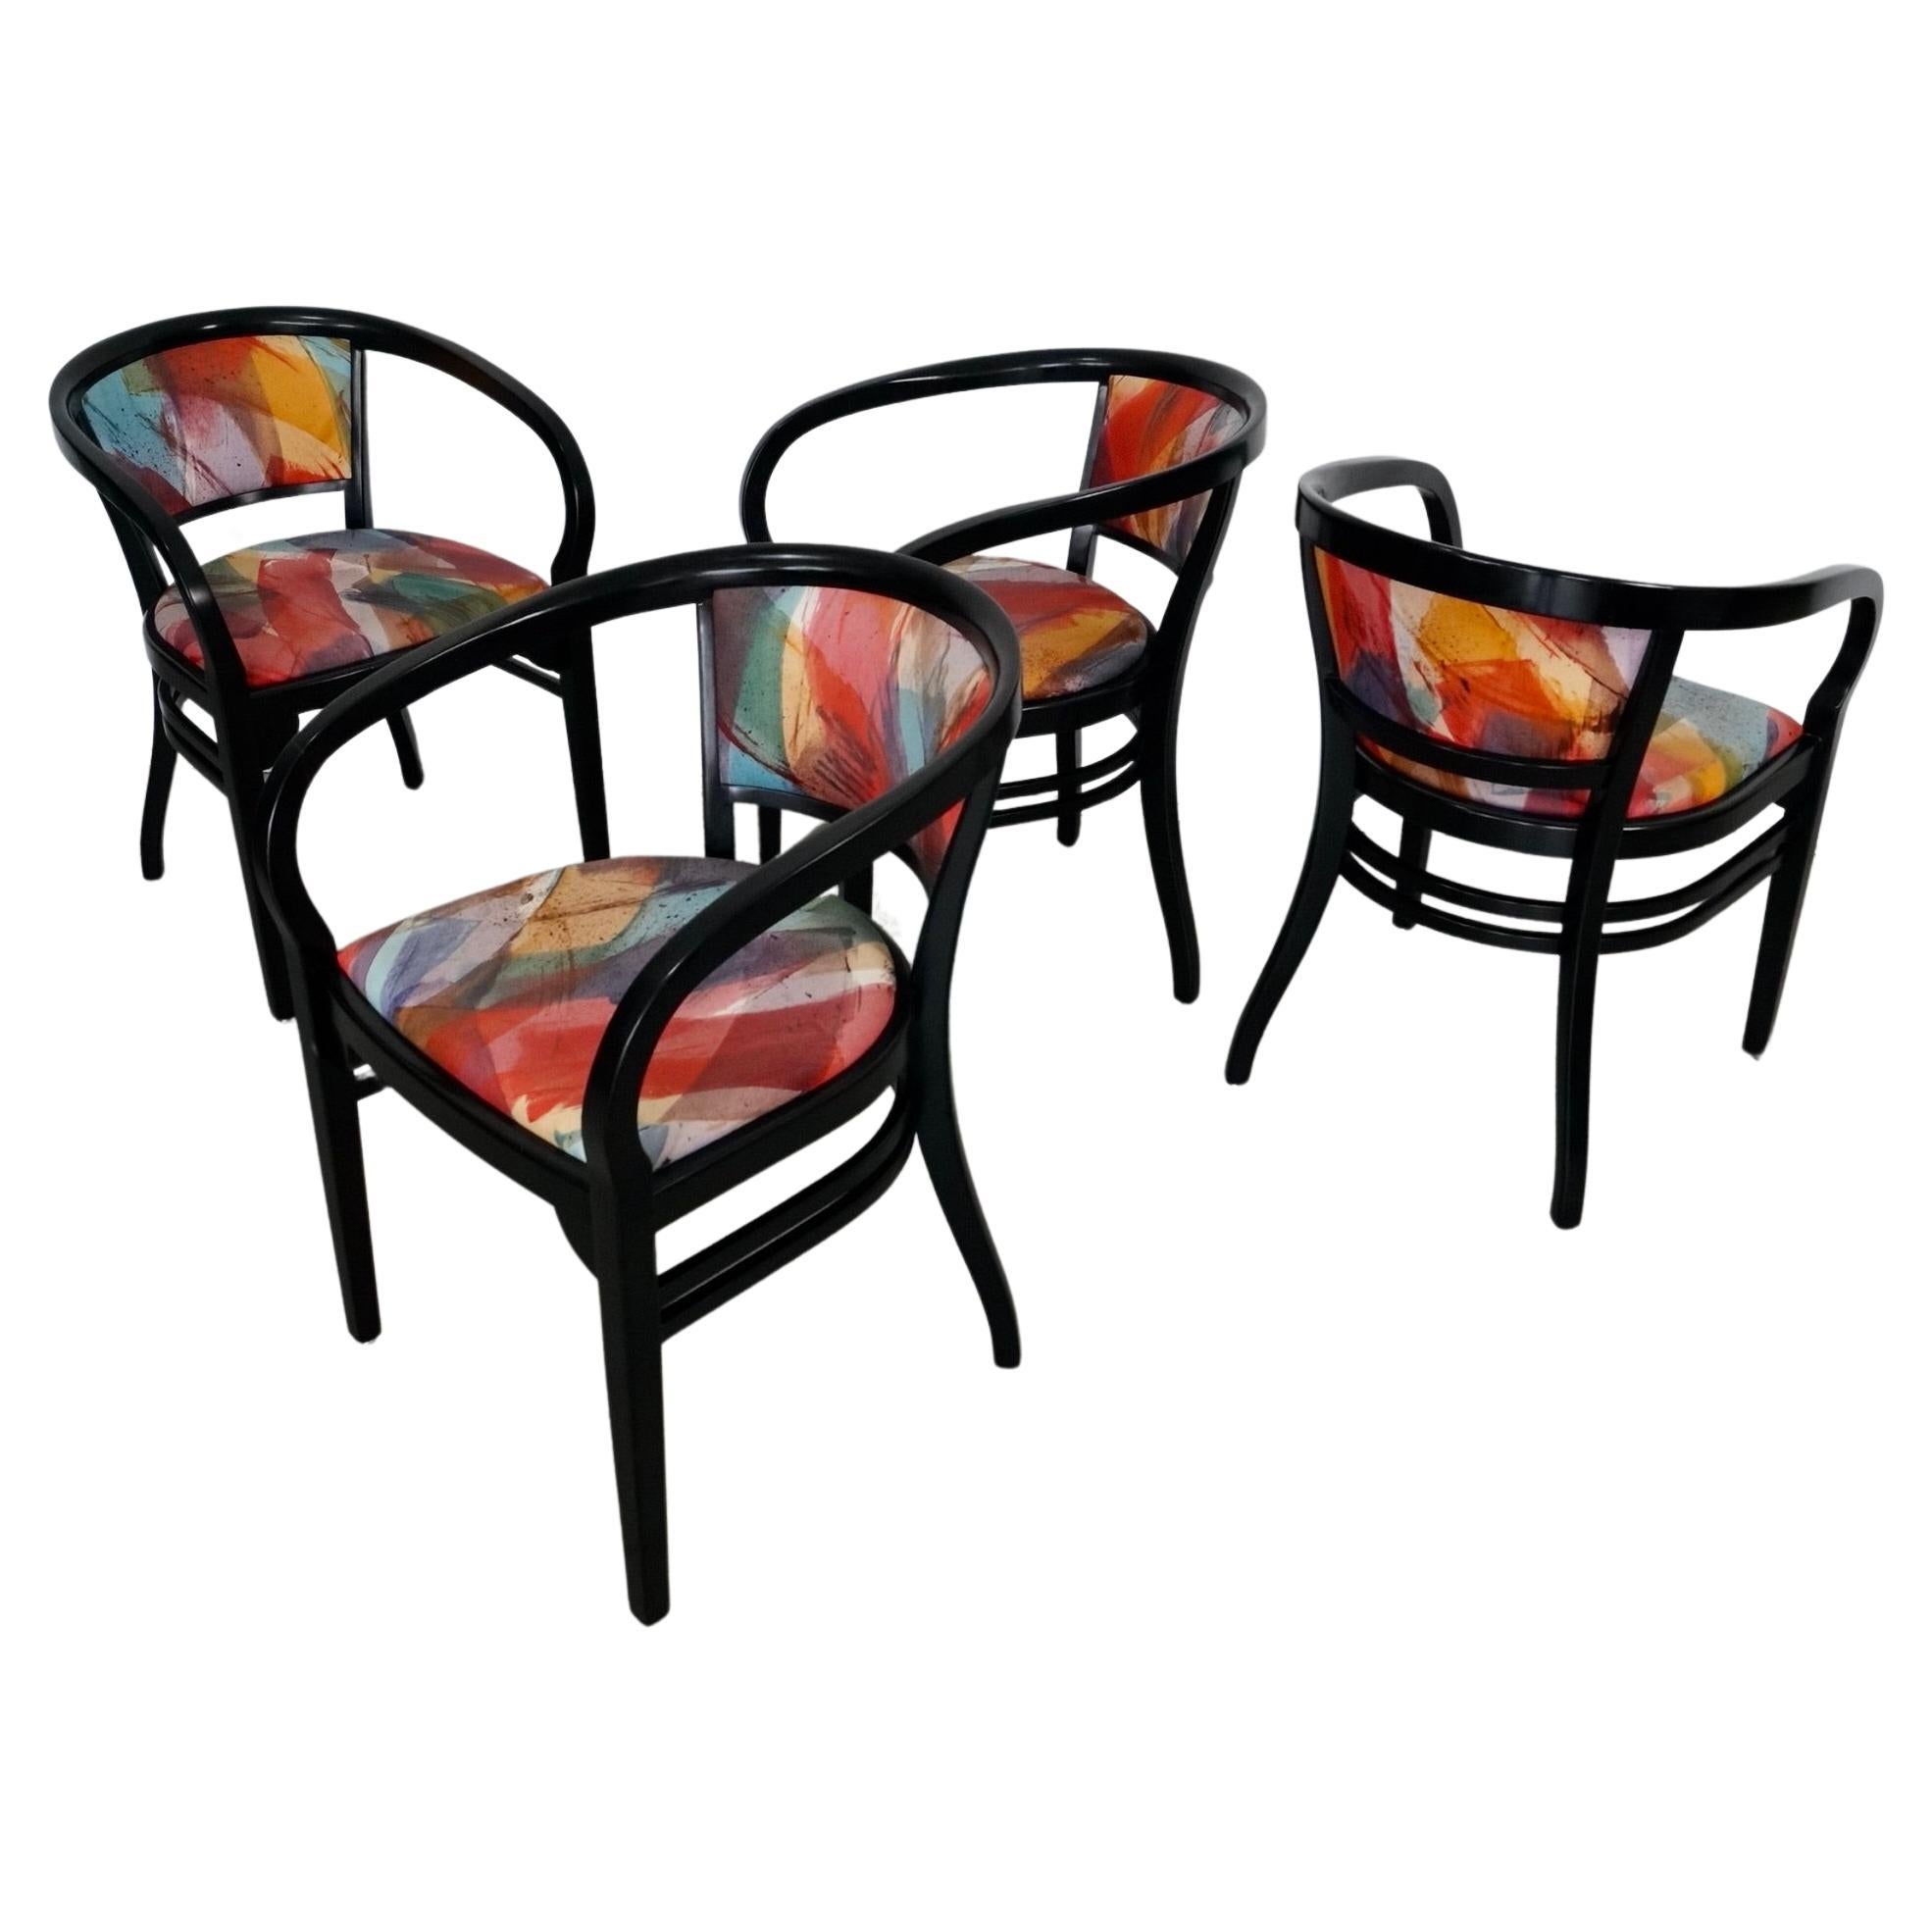 1980's Postmodern Black Lacquered Dining Armchairs by Nienkamper - Set of 4